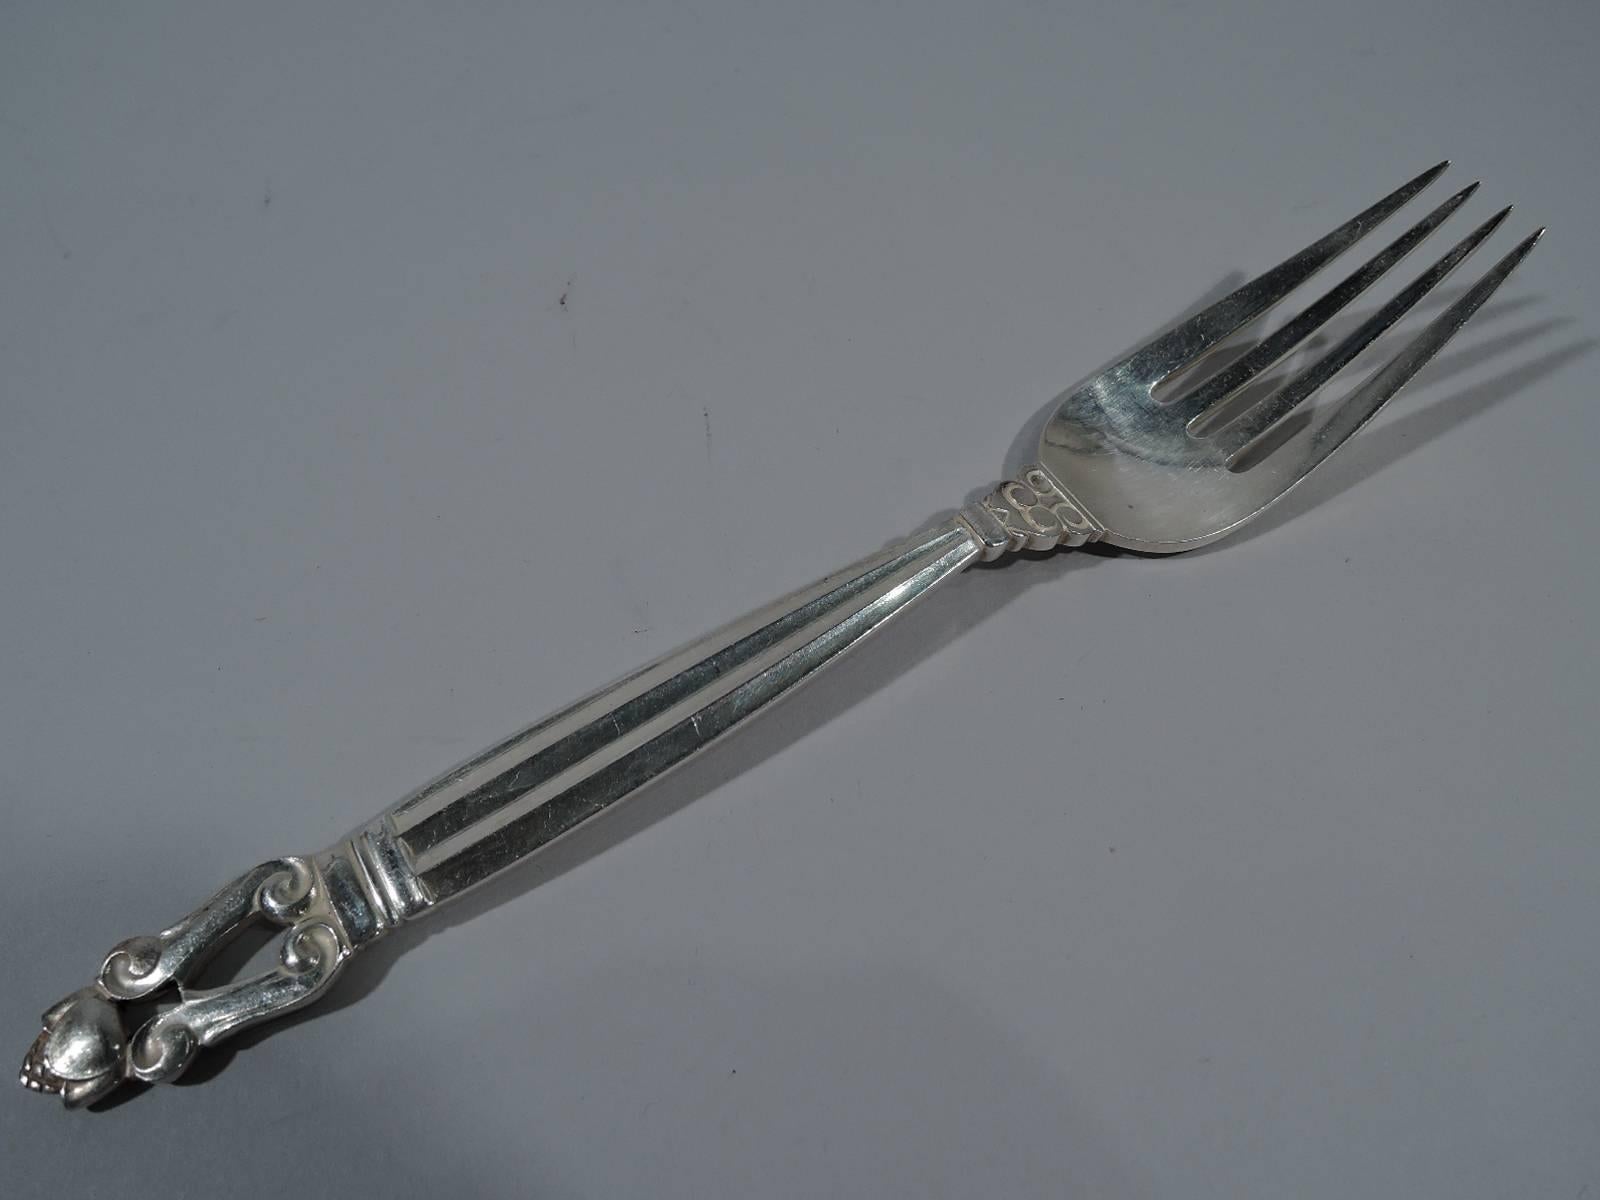 Sterling silver dinner service in Acorn pattern. Made by Georg Jensen in Copenhagen. This service comprises 72 pieces (dimensions in inches): Knives: 12 dinner knives (9); Forks: 12 dinner forks (7 3/8) and 12 3-tine salad forks (6 1/2); Spoons: 12